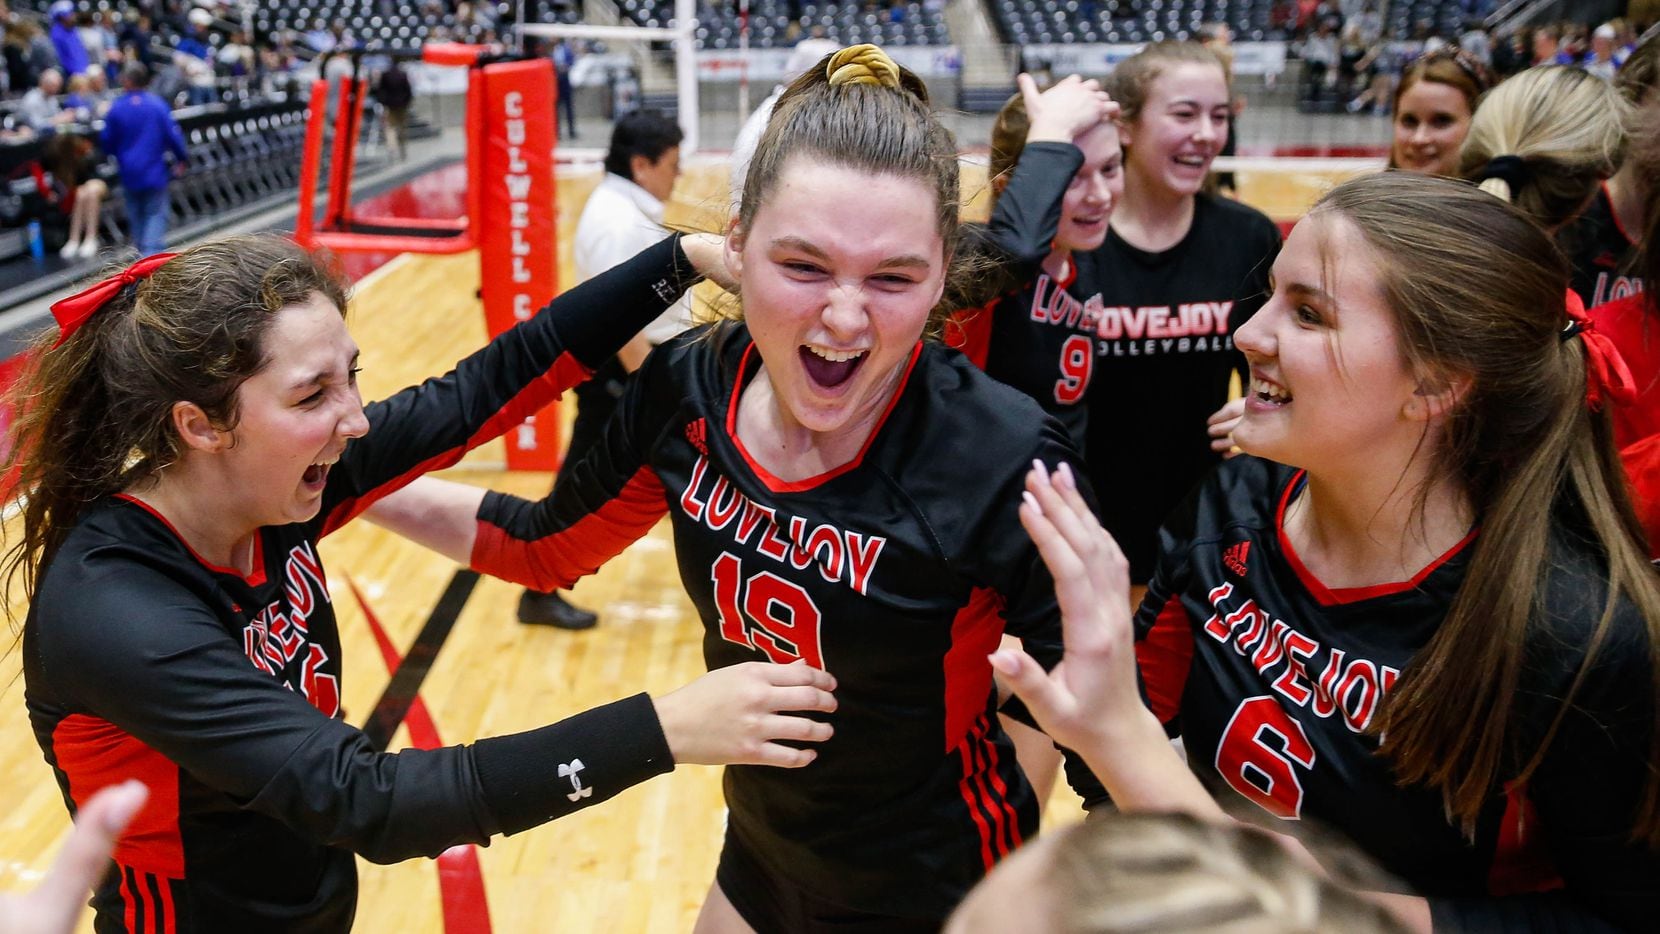 Lovejoy's Lexie Collins (19) (center) celebrates with her team after beating Friendswood in the fourth and final set of a class 5A volleyball state semifinal match at the Curtis Culwell Center in Garland, on Friday, November 22, 2019. Lovejoy advanced to finals after winning the fourth set 25-22. (Juan Figueroa/The Dallas Morning News)